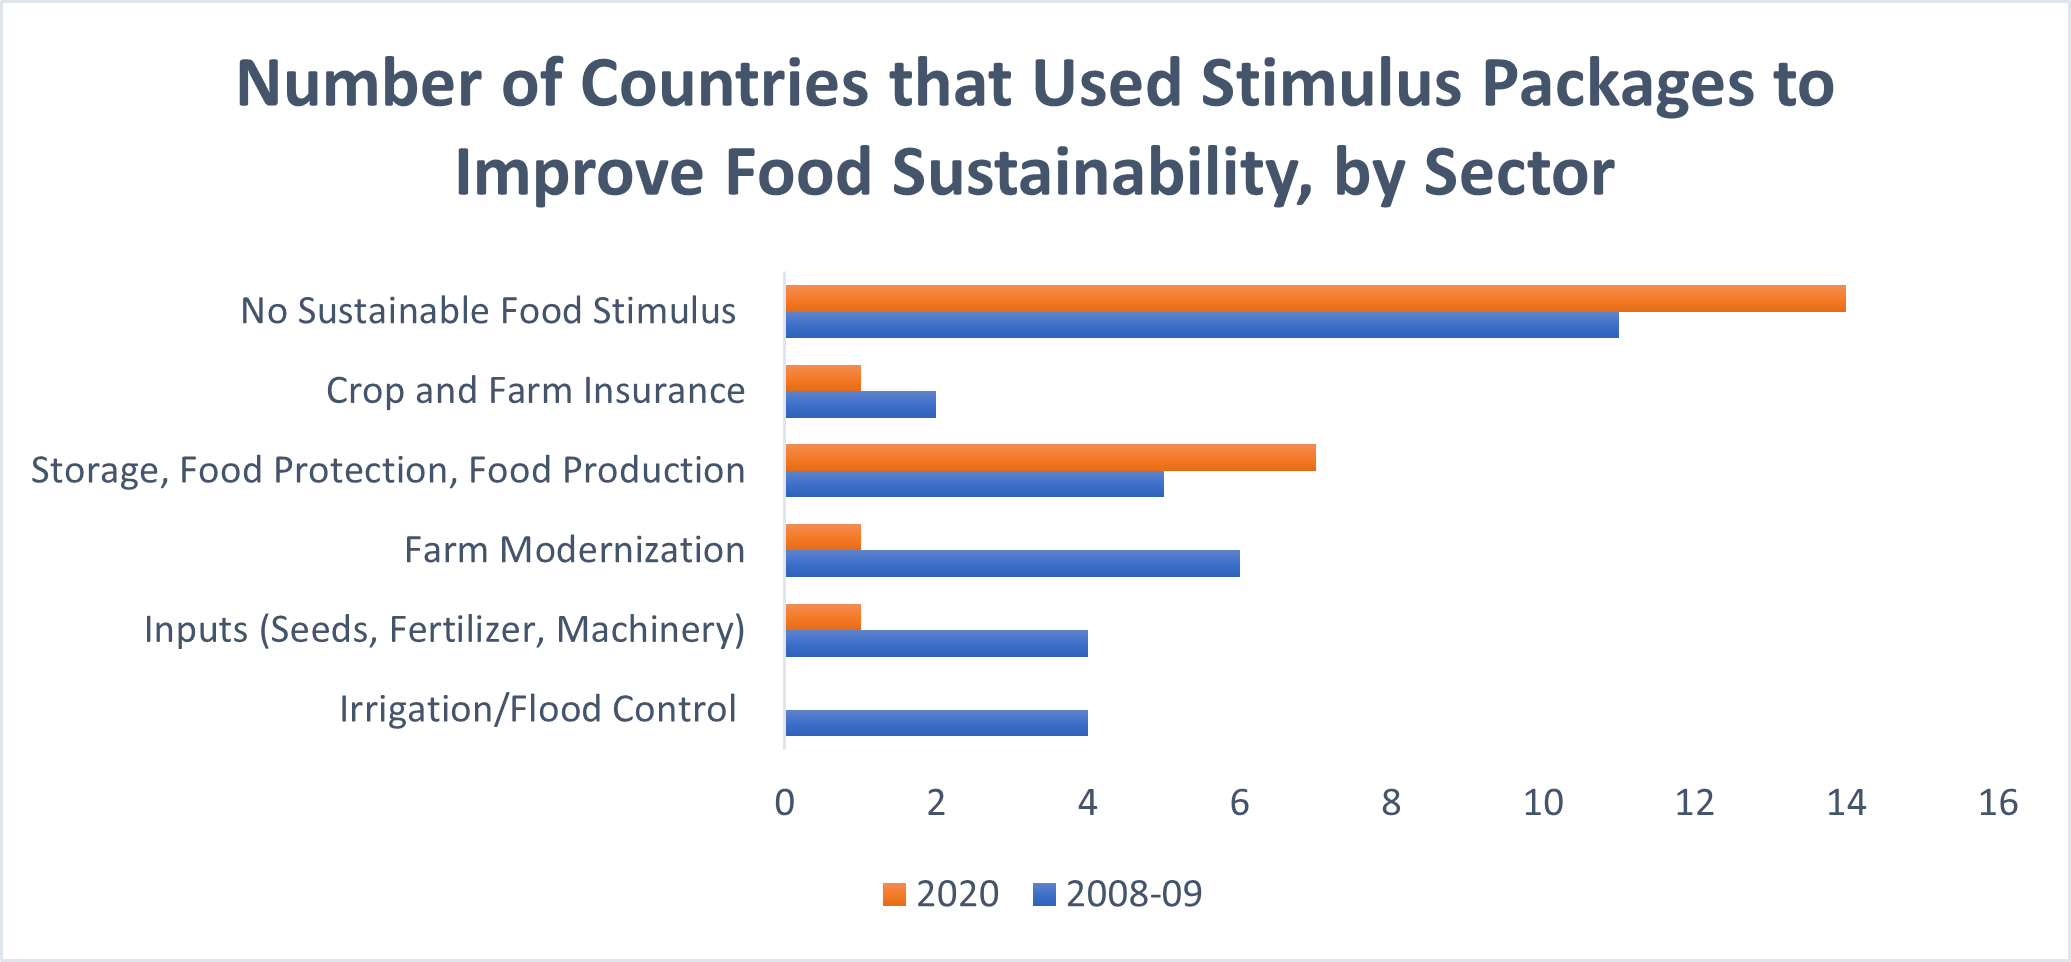 Number%20of%20Countries%20that%20Used%20Stimulus%20Packages%20to%20Improve%20Food%20Sustainability%20by%20Sector